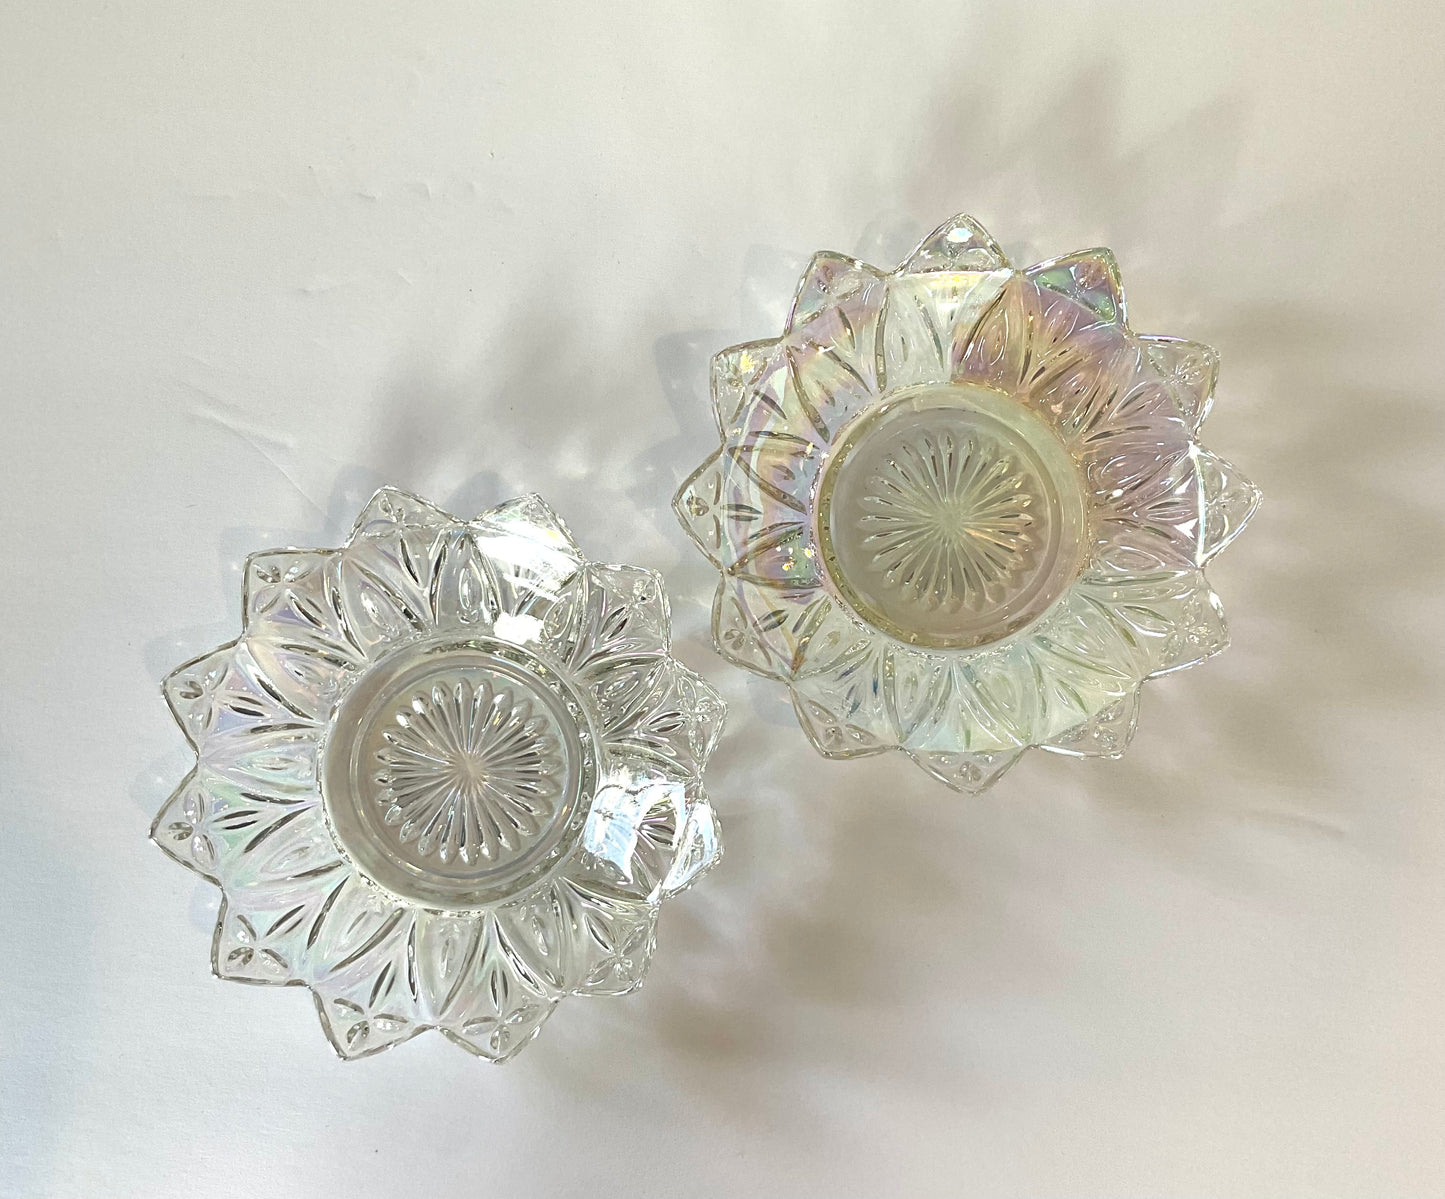 Set of 2 Vintage Iridescent Carnival Glass Nut/Candy Dishes